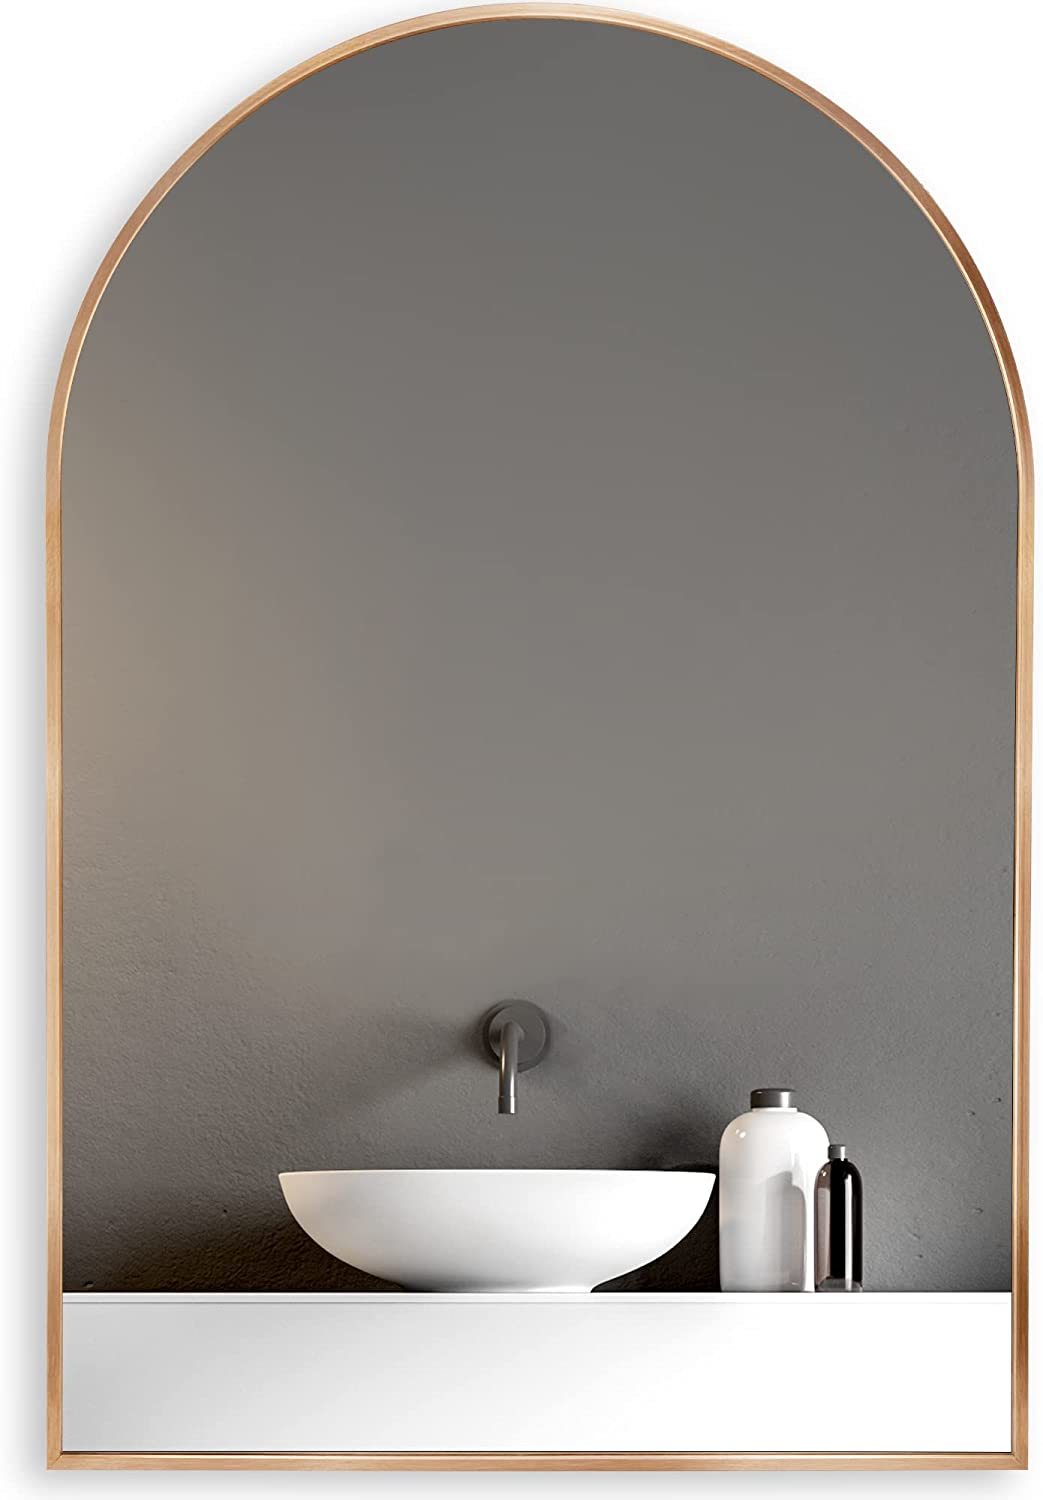 Primary image for Howofurn 24*36" Arched Wall Mounted Mirror, Wall Decor, W/ Metal Frame For, Gold